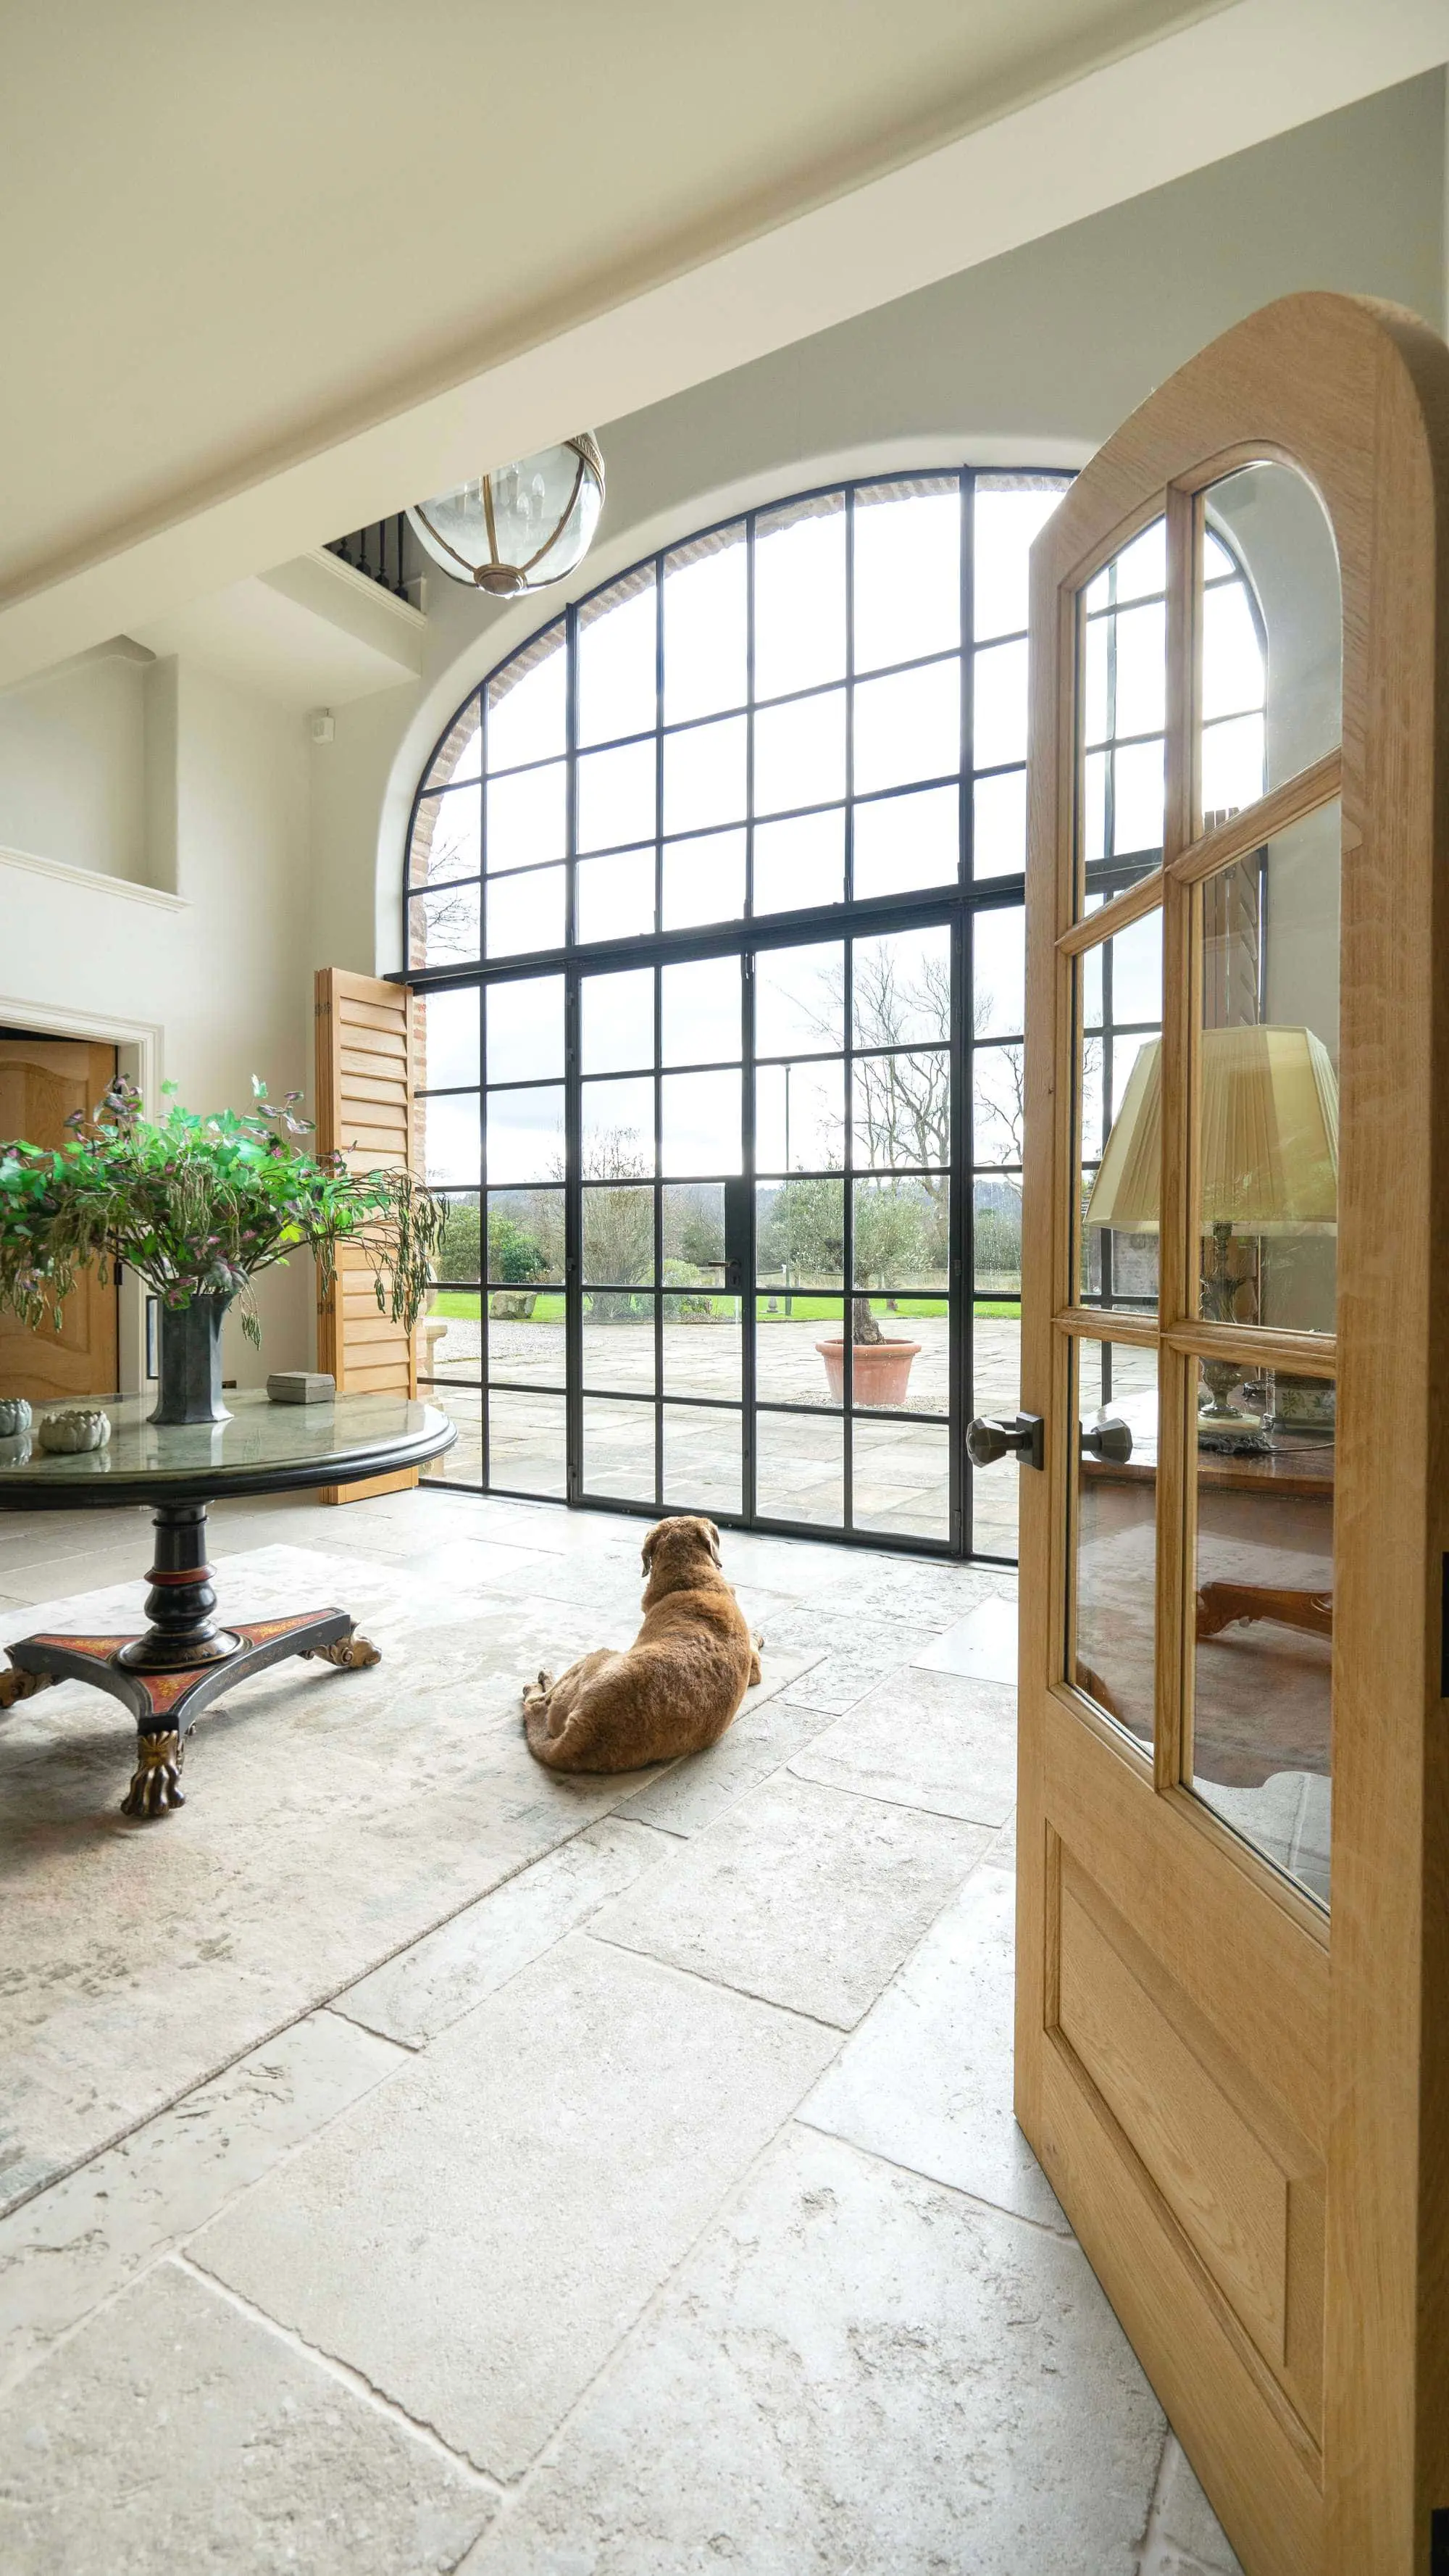 Internal view of the large arched Crittall screen, a real feature of the home.